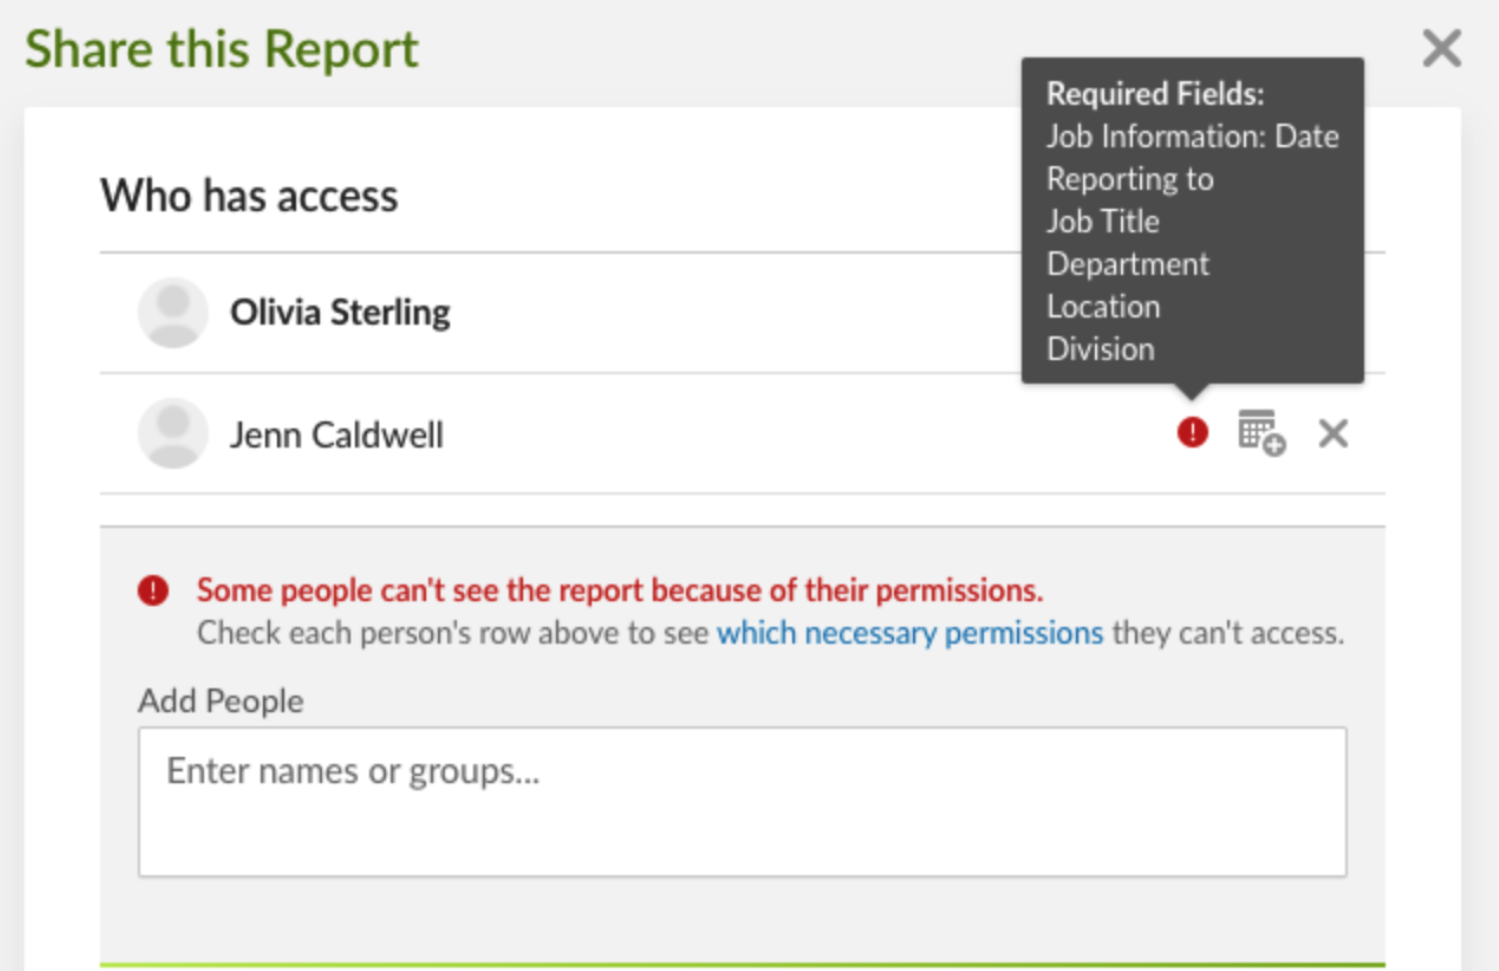 Required Fields When Sharing Report